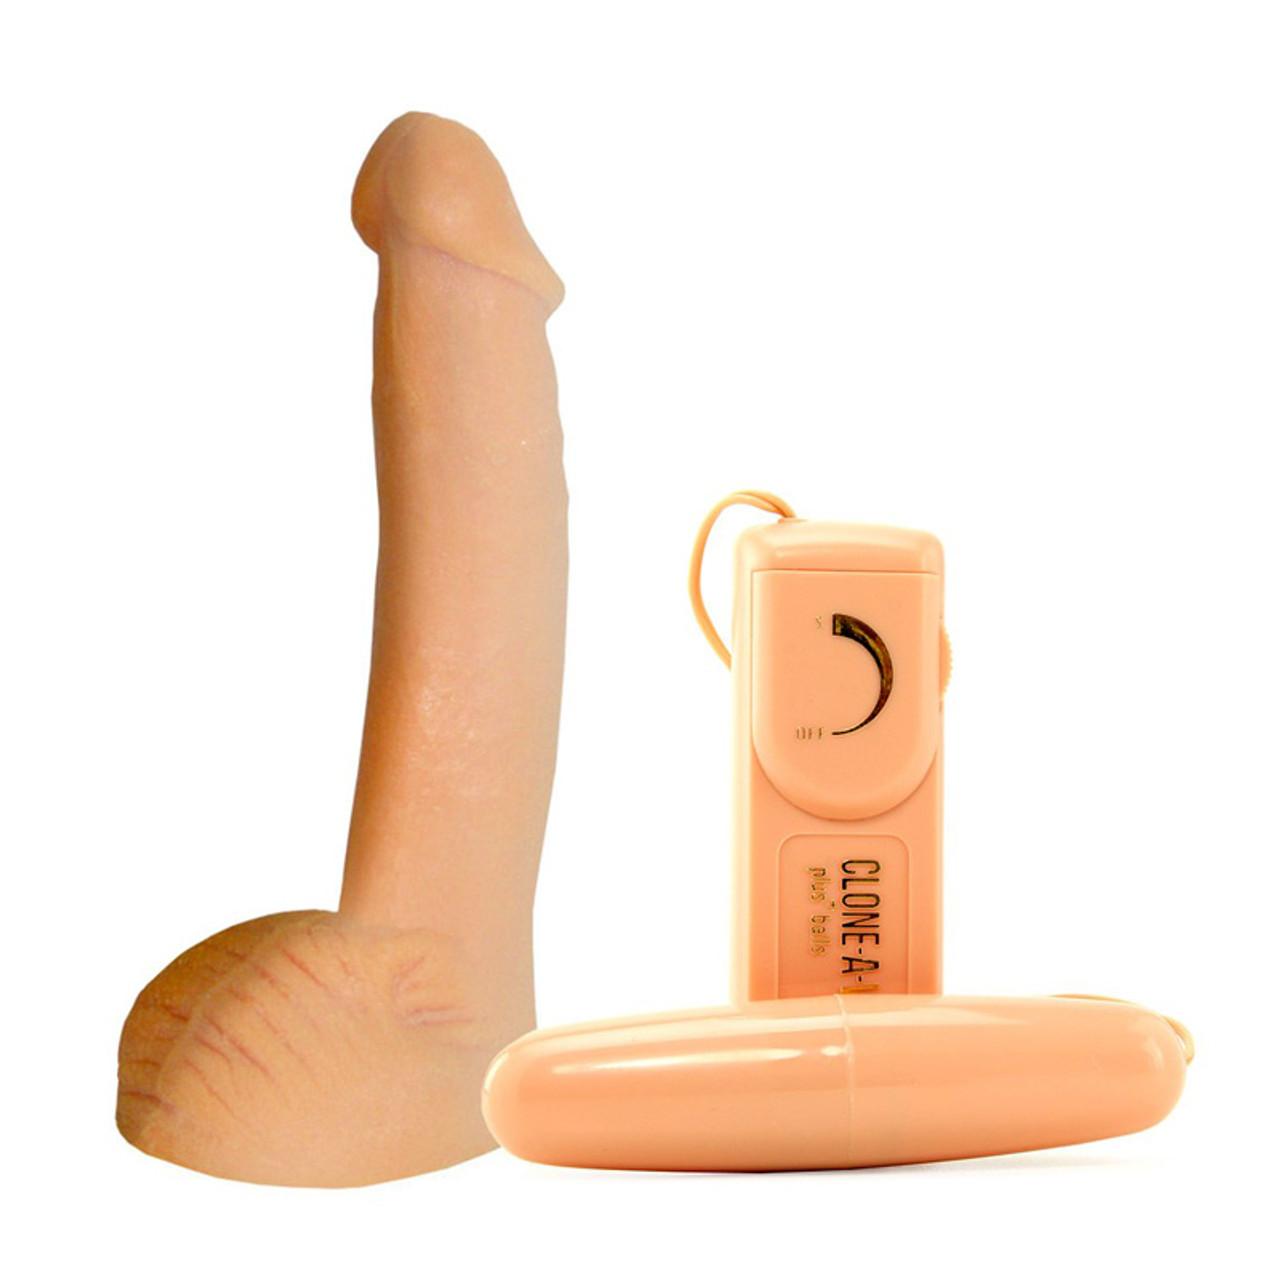 CLONE-A-WILLY - Silicone Penis Casting Kit for DIY Dildo (Light Skin Tone)